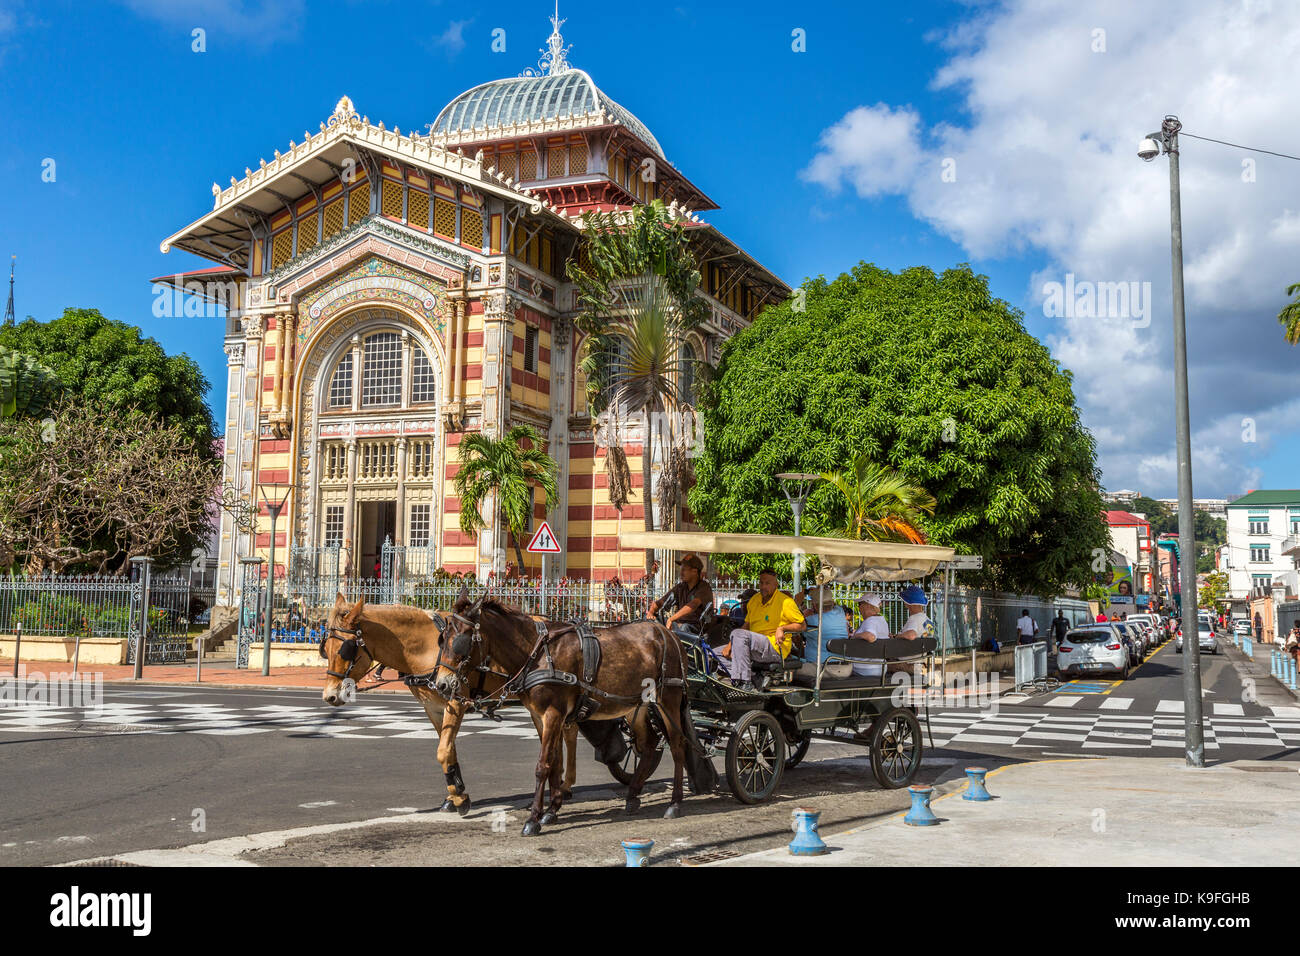 Fort-de-France, Martinique.  Tourists in Carriage  Passing the Victor Schoelcher Library Museum, Romanesque Architectural Style. Stock Photo